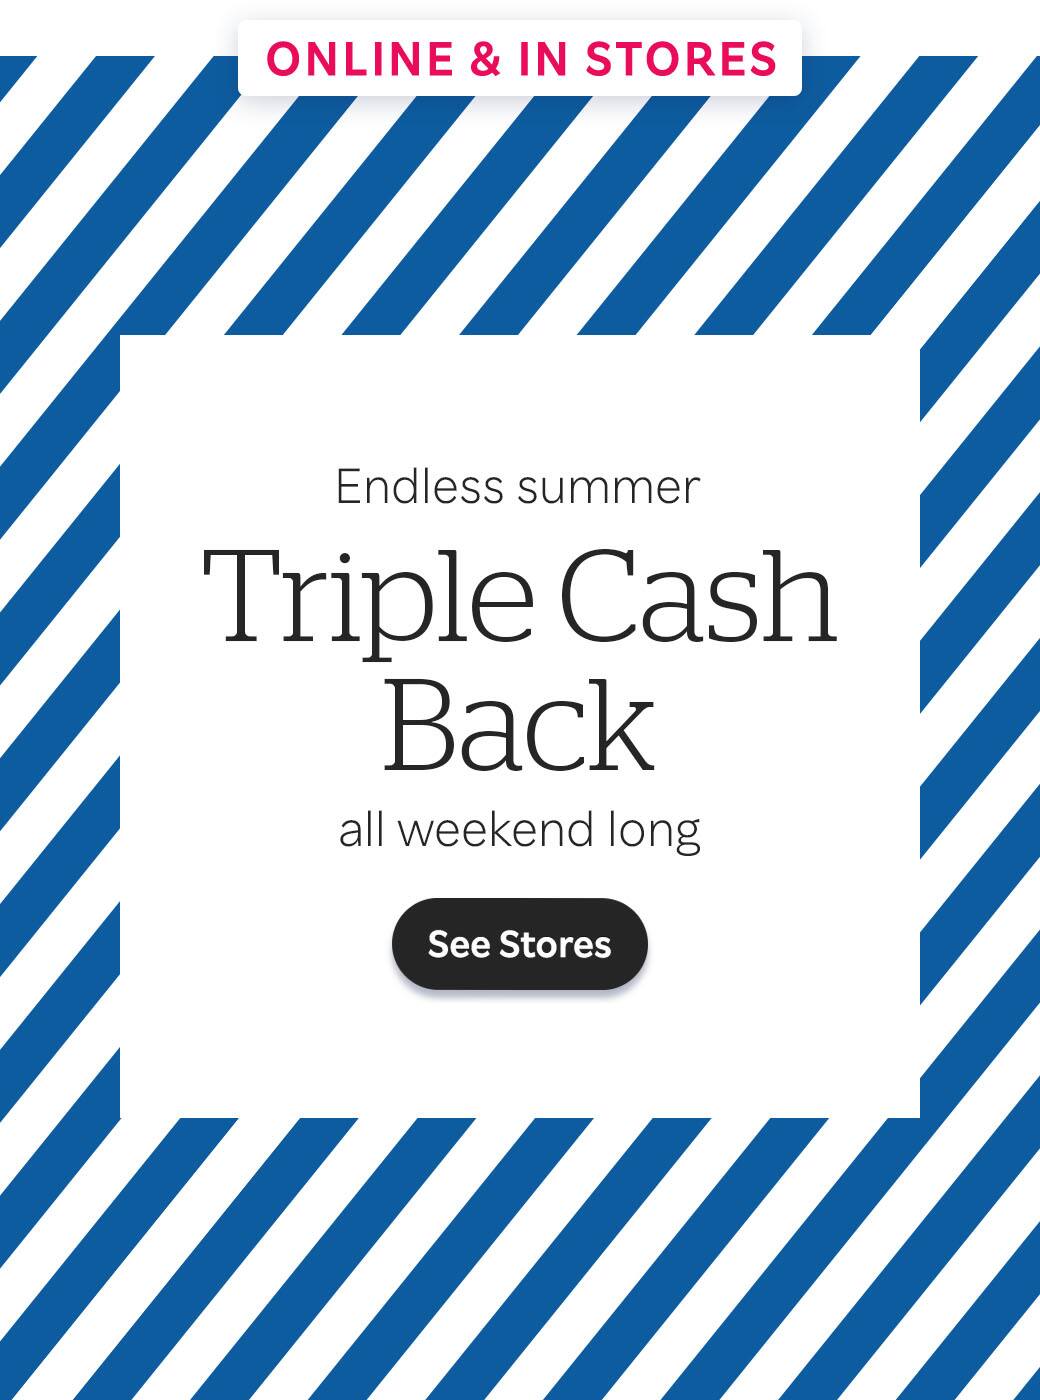 Online & In Stores: Savings of all stripes. Double Cash Back. See Stores